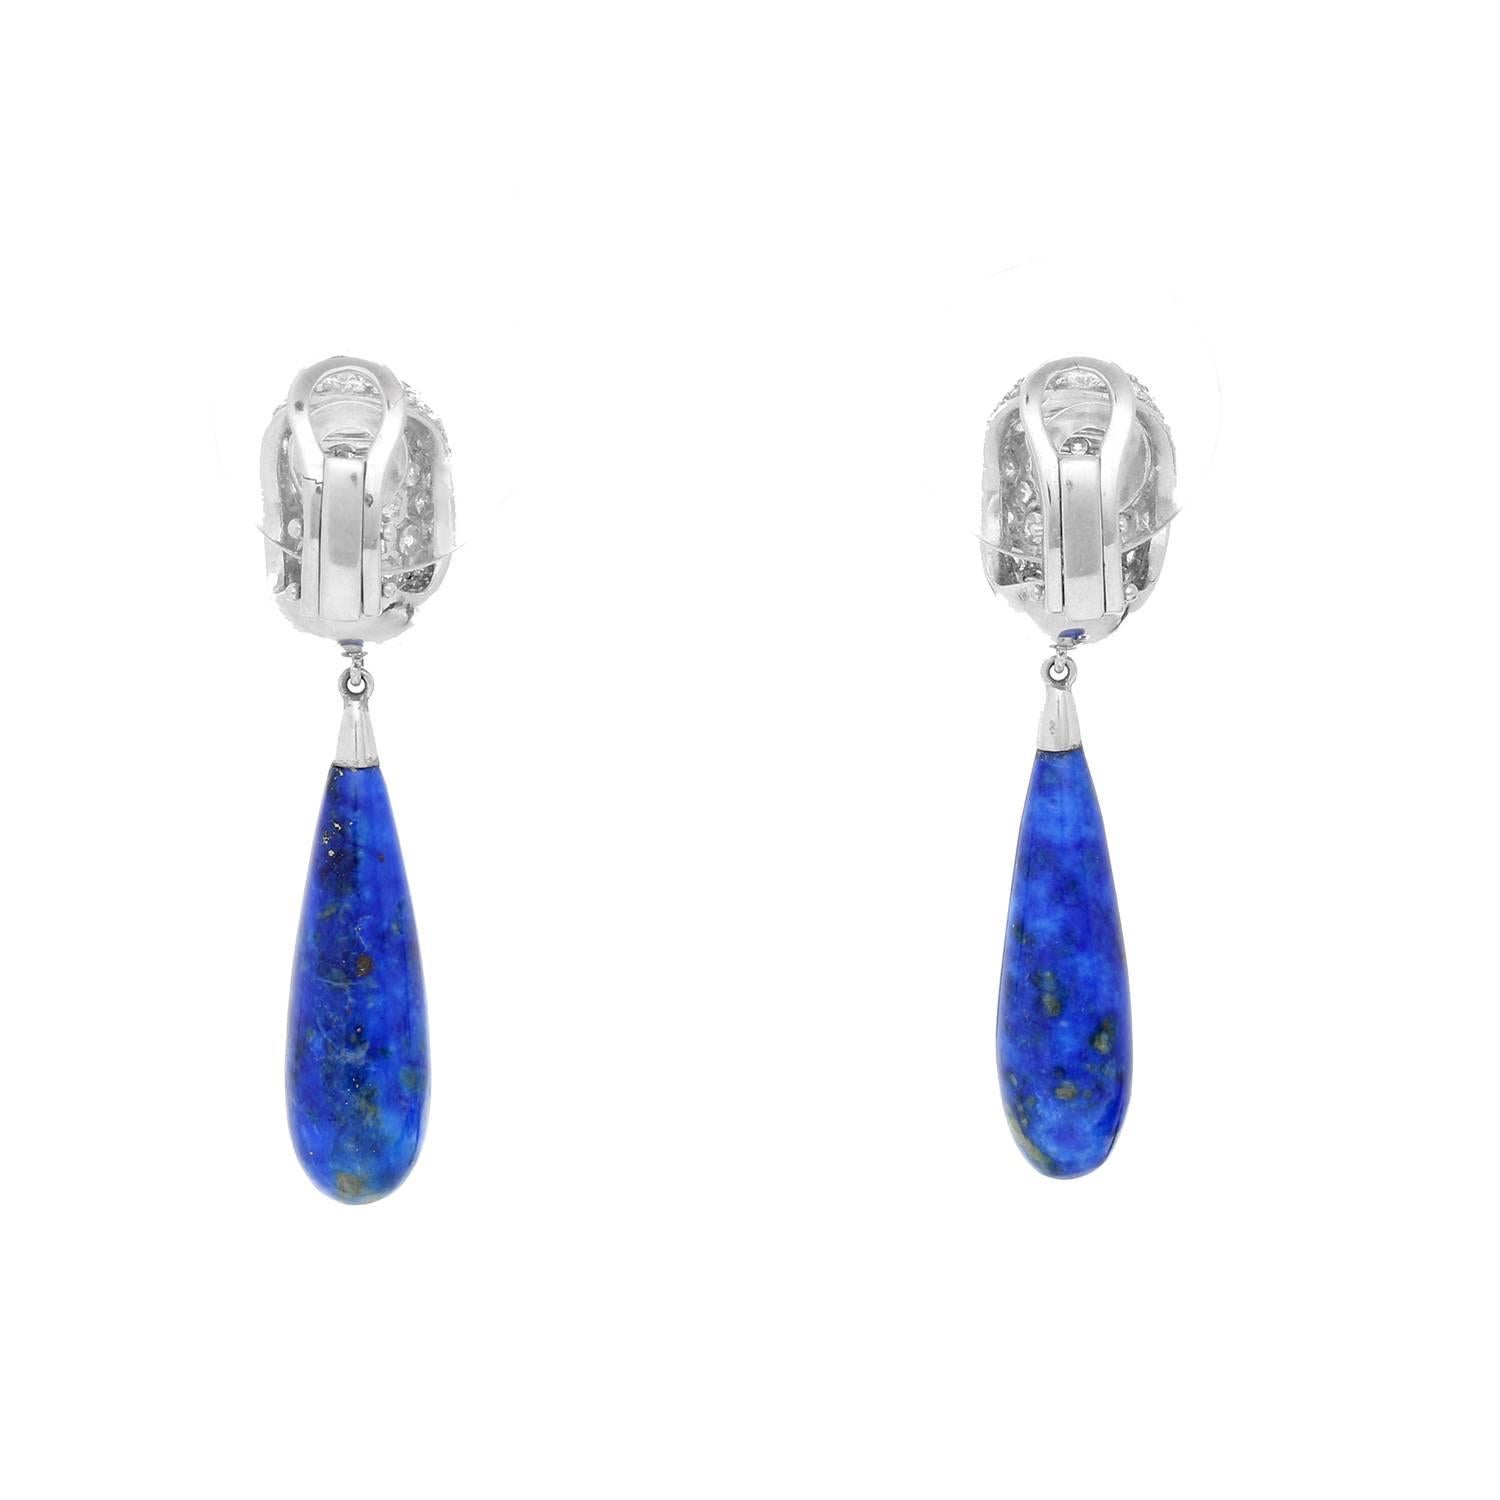 Carvin French Lapis Lazuli Platinum Earrings In Excellent Condition For Sale In Dallas, TX